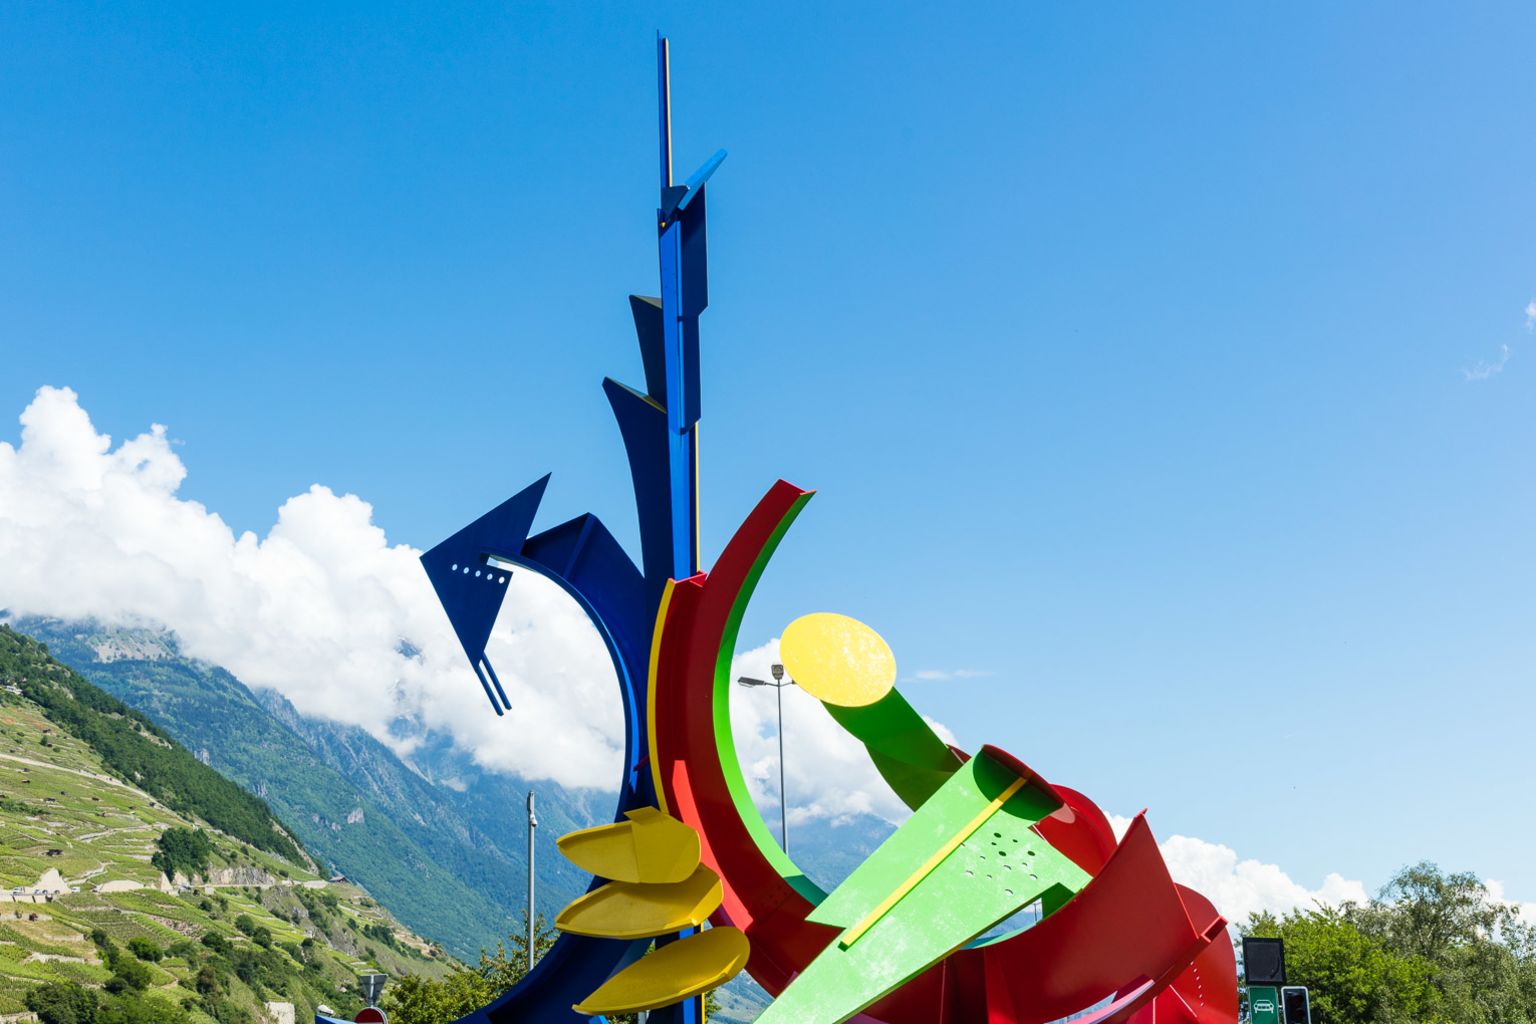 Discover on foot or by car the sculptures and works of art that adorn 17 roundabouts in the town of Martigny, Valais, Switzerland